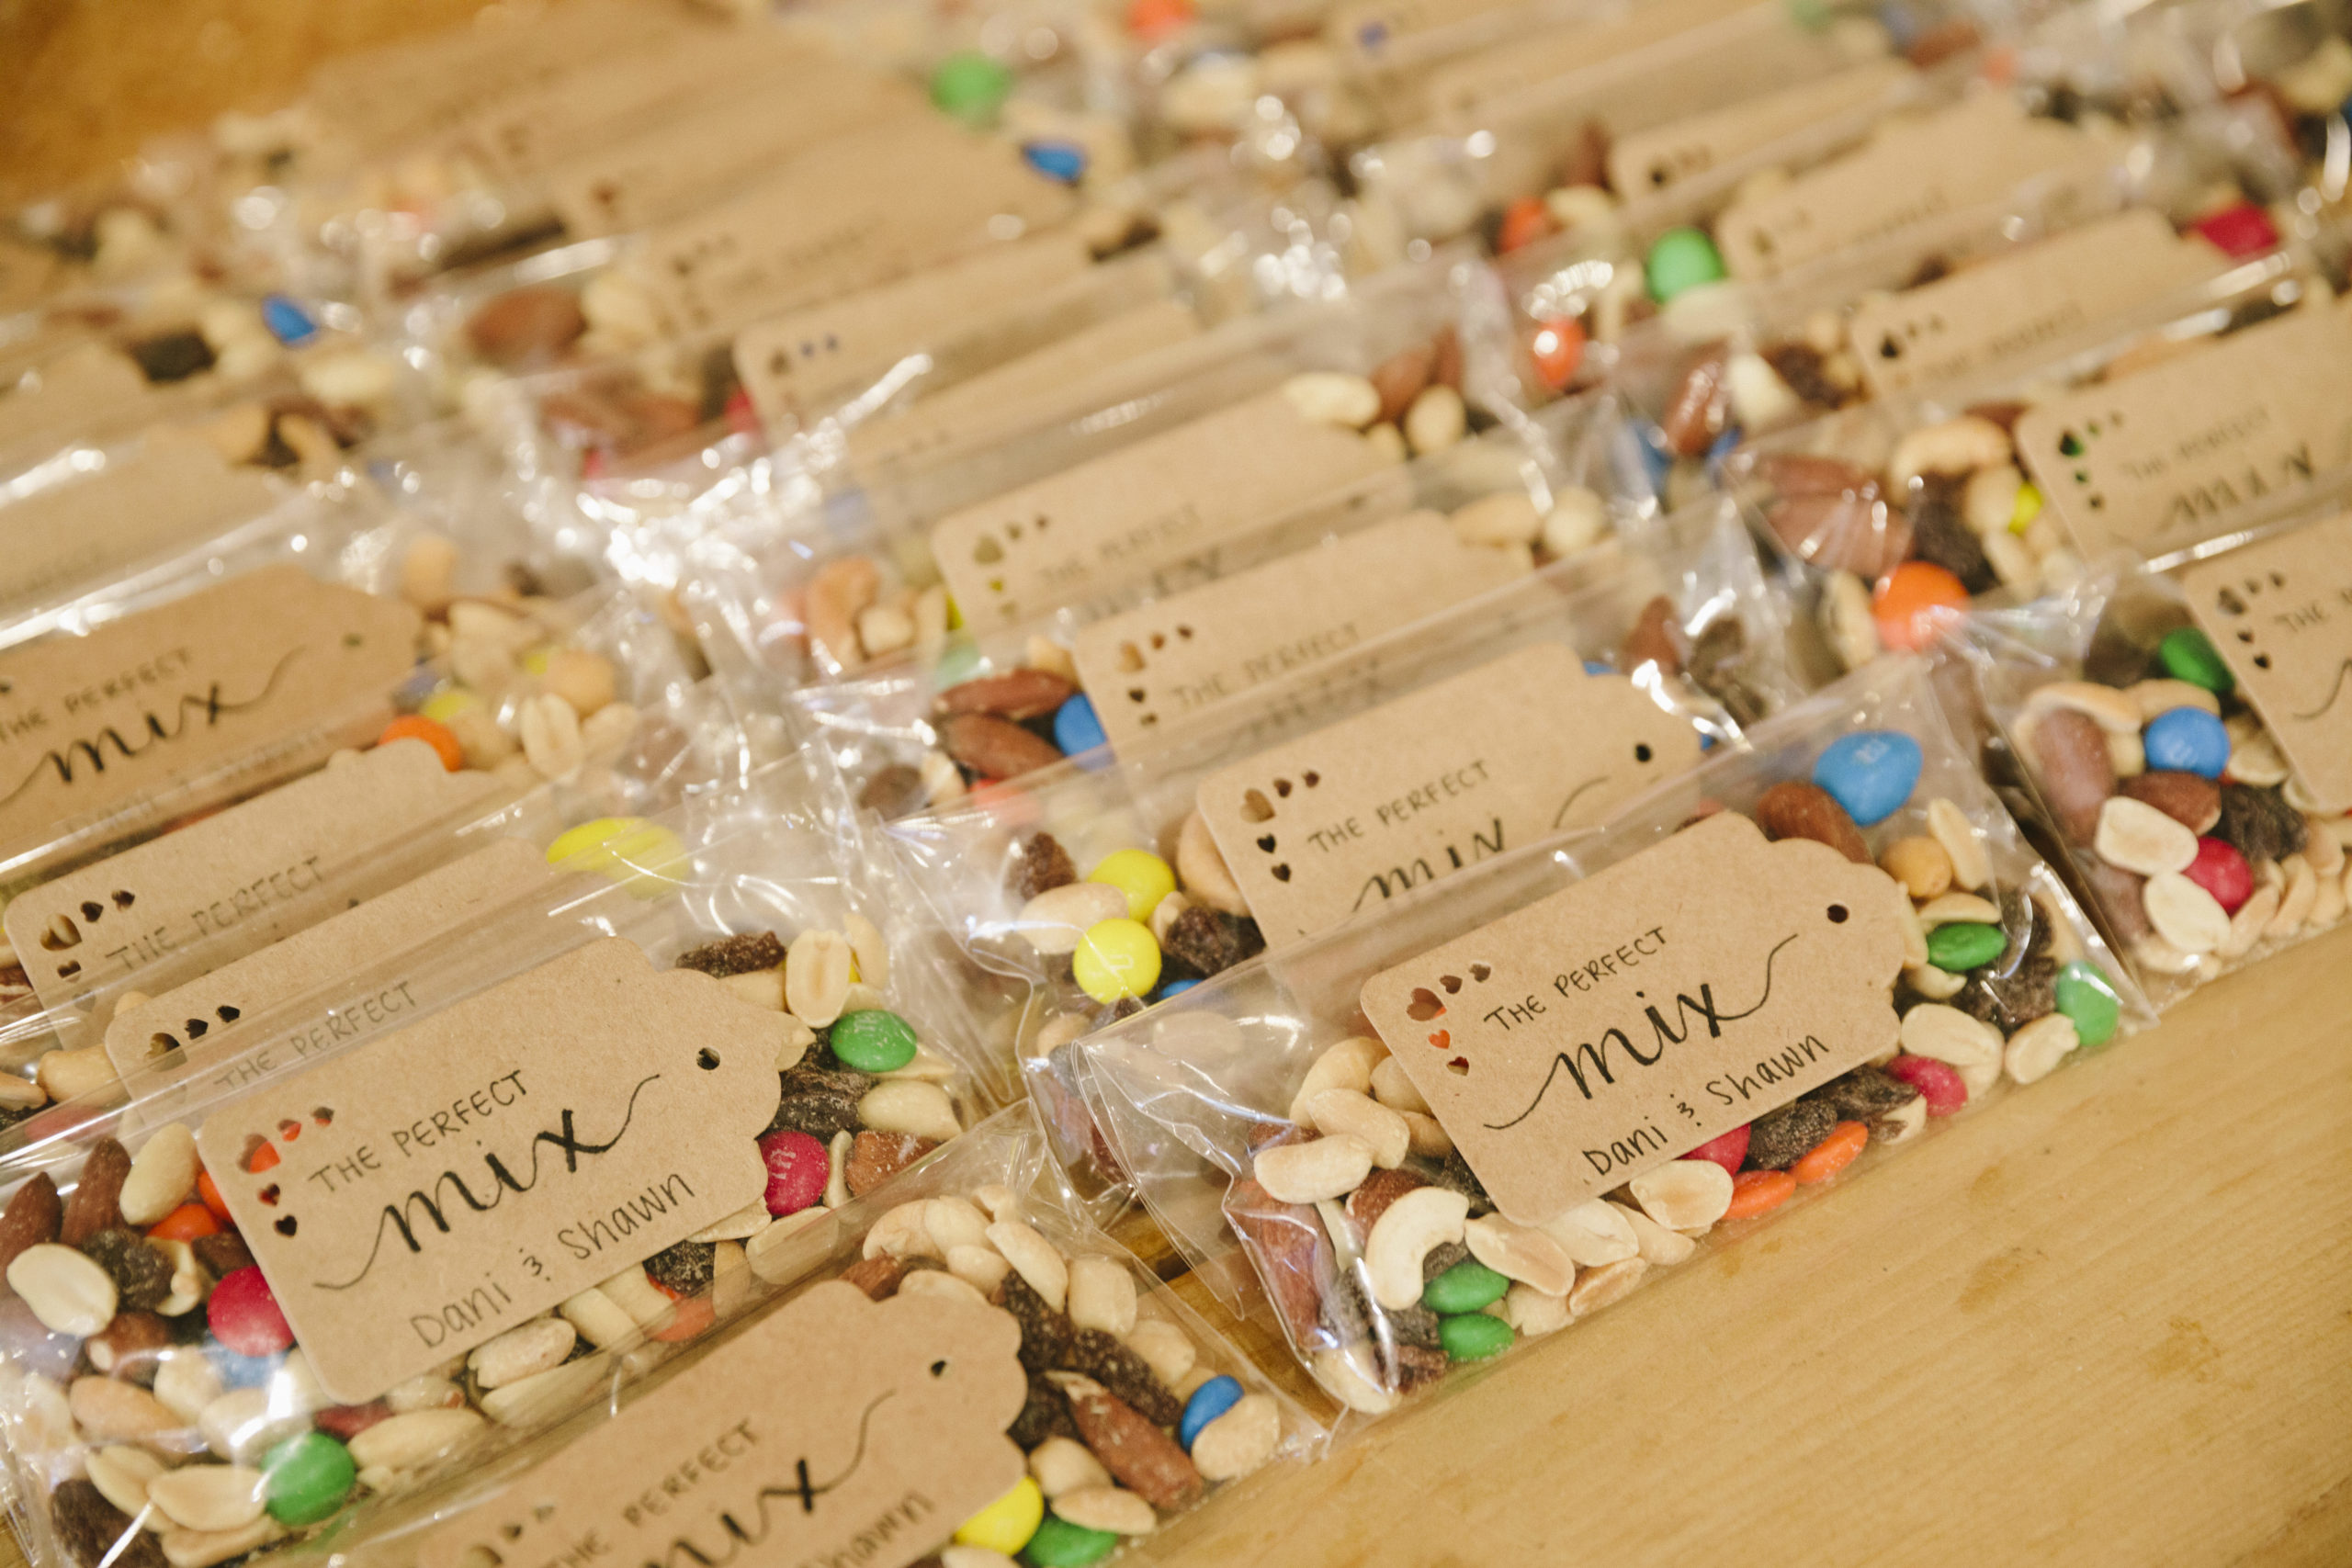 Trail mix bag wedding favors for a ranch wedding